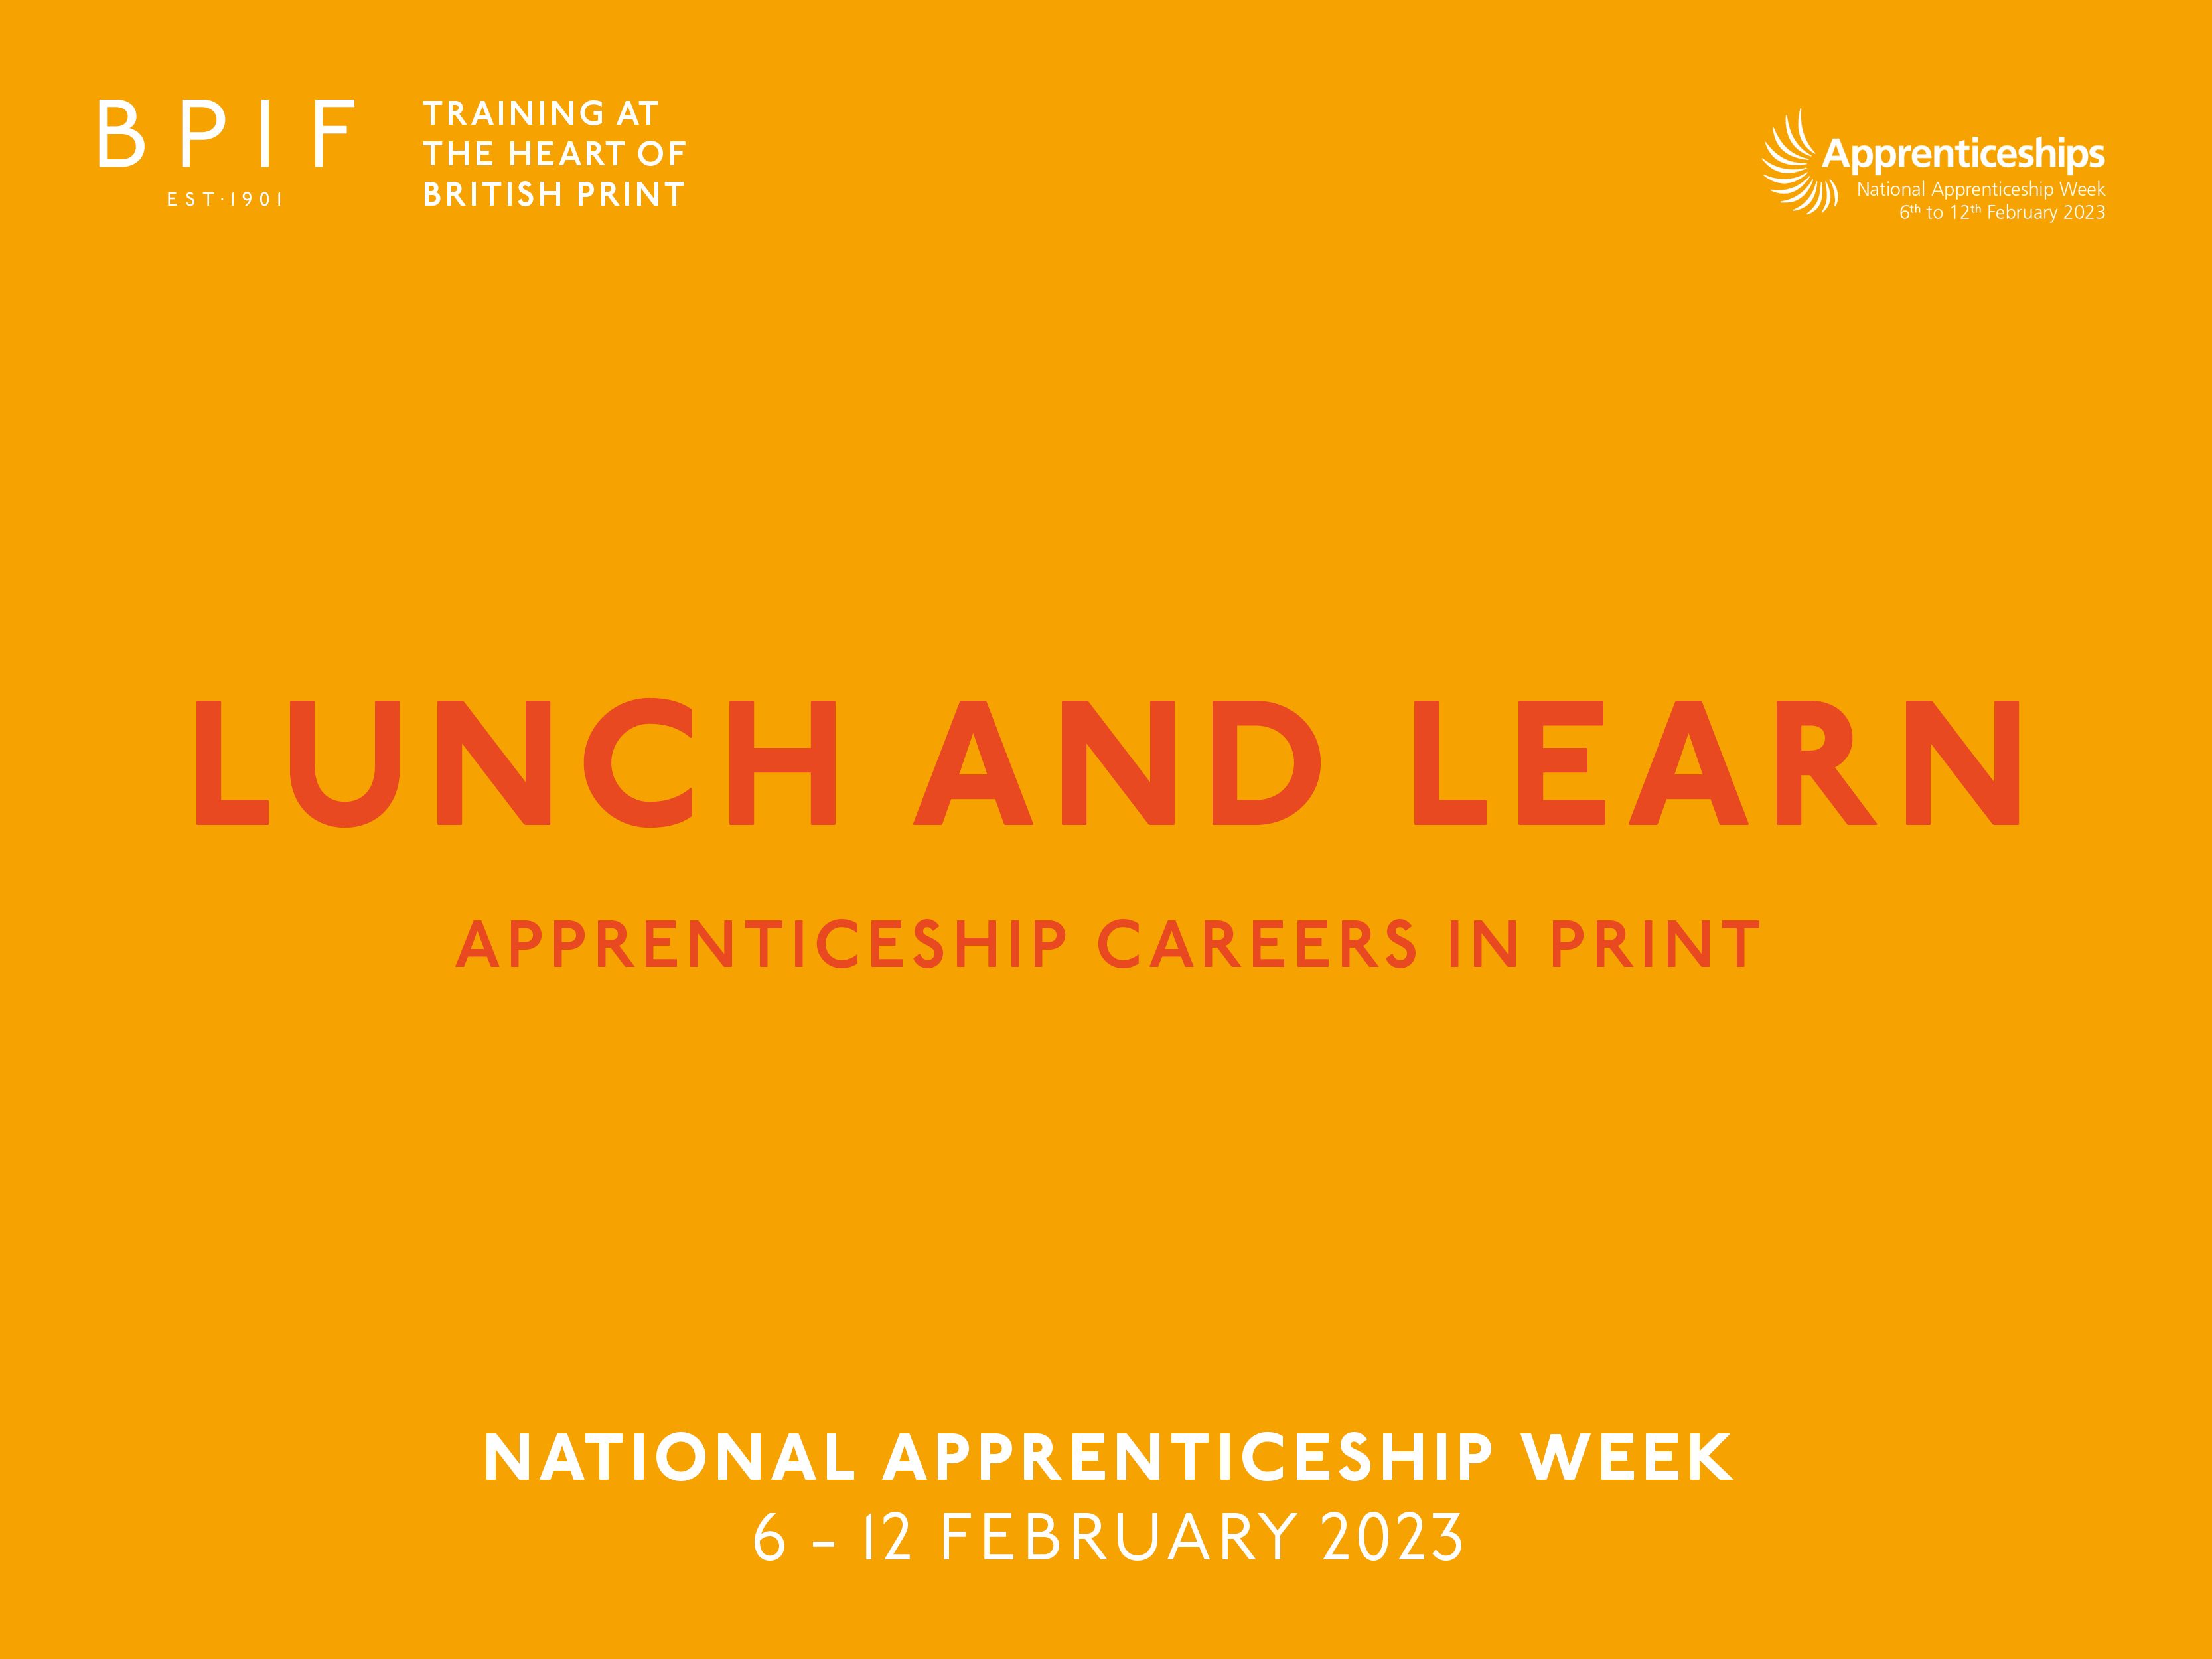 Lunch and Learn – Apprenticeship Careers in Print